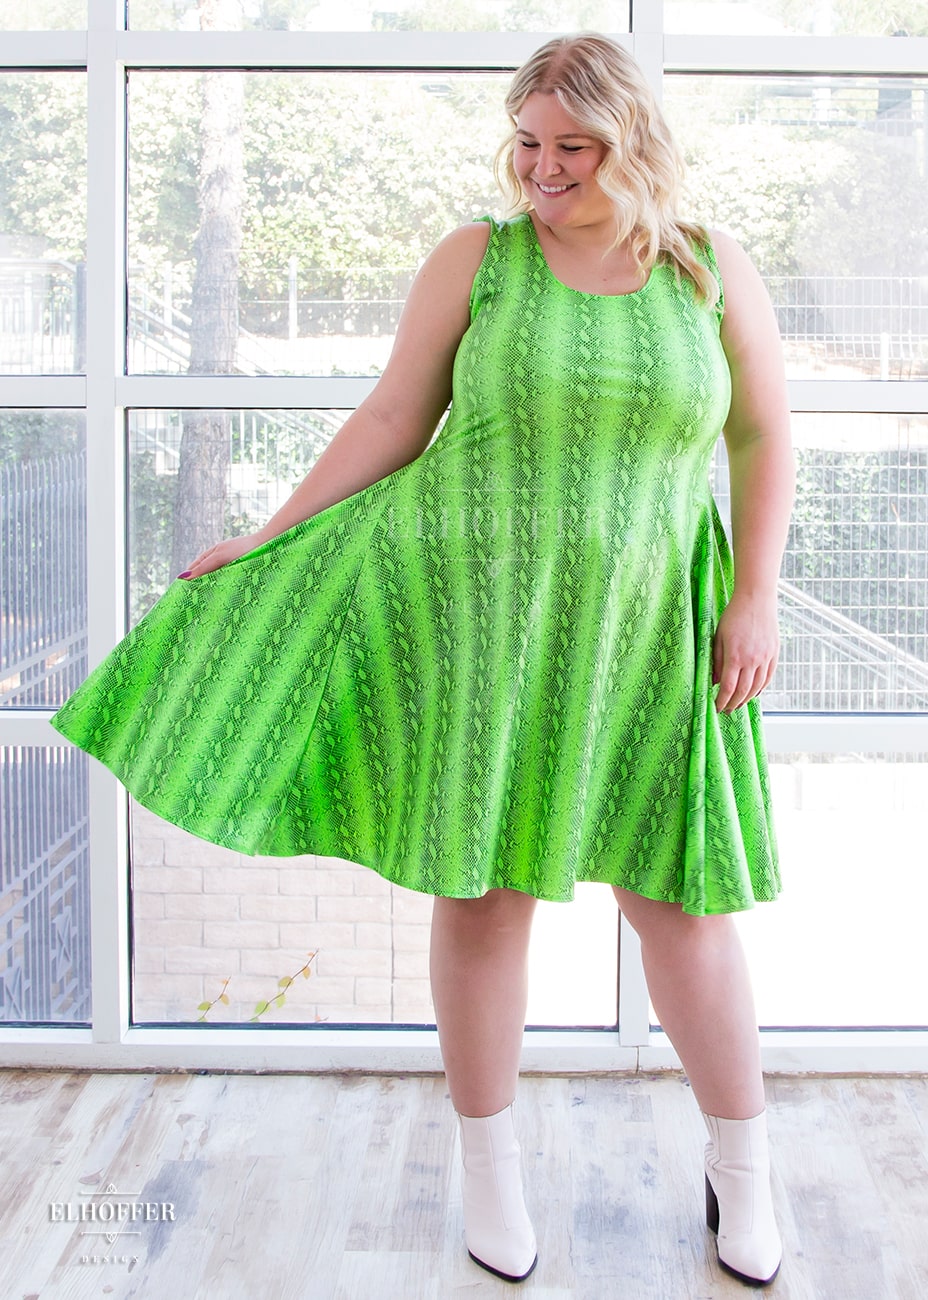 Sarah, a fair skinned size XL model with long blonde hair, wears a sleeveless knee length dress that is fitted in the torso and full in the skirt. The print is croki green, a lime green snake print. She holds out the side of her dress to show the fullness.